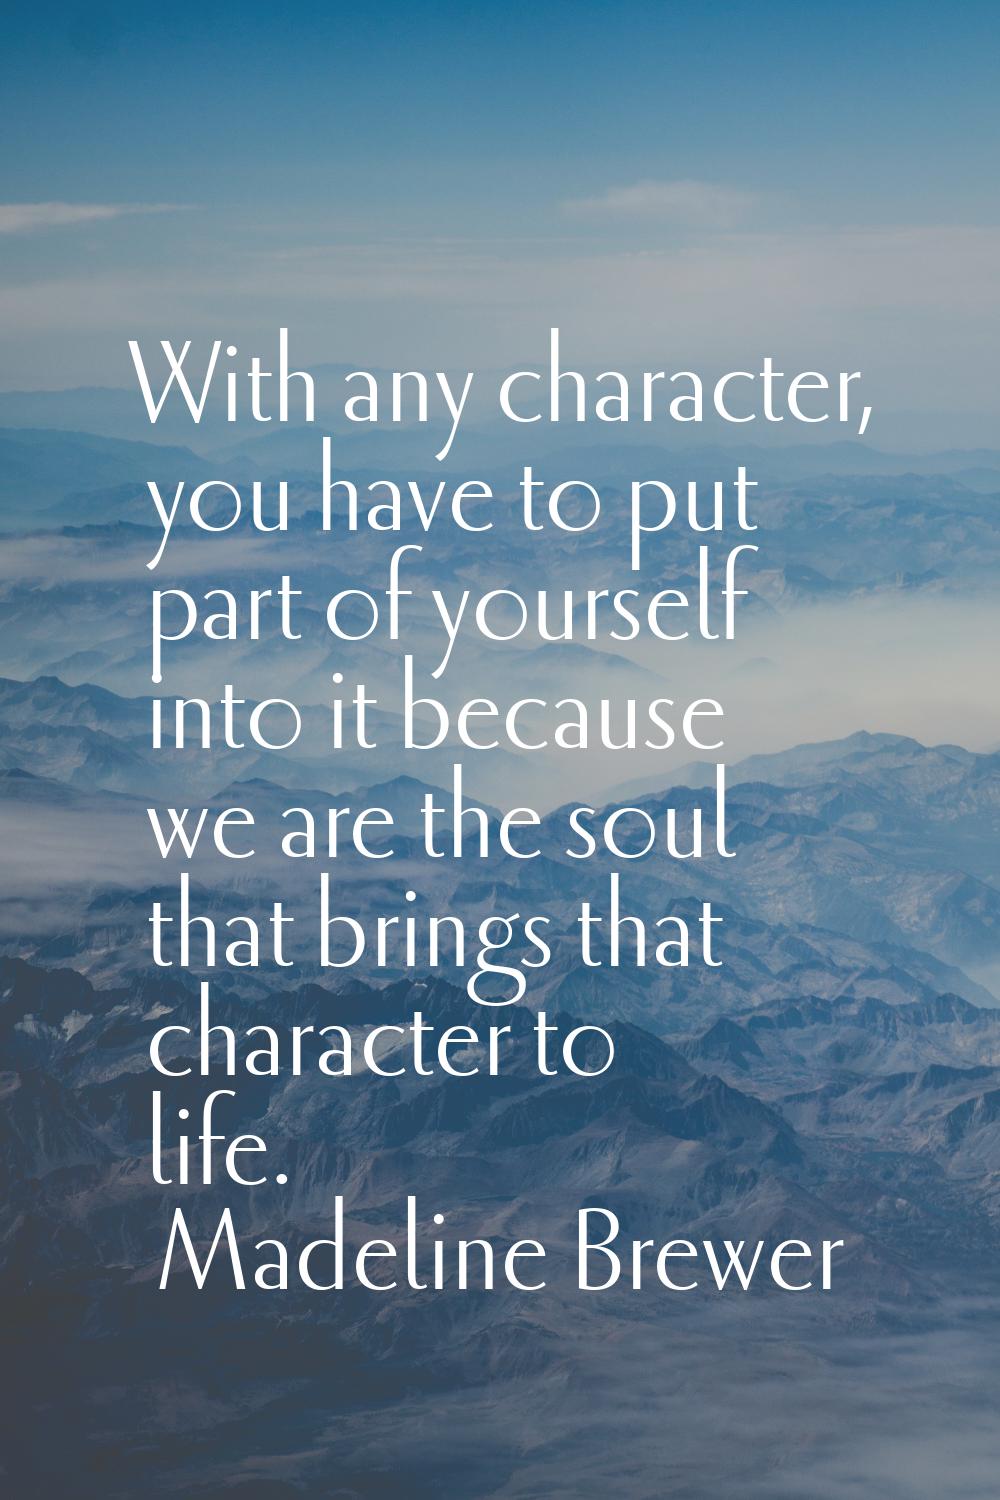 With any character, you have to put part of yourself into it because we are the soul that brings th